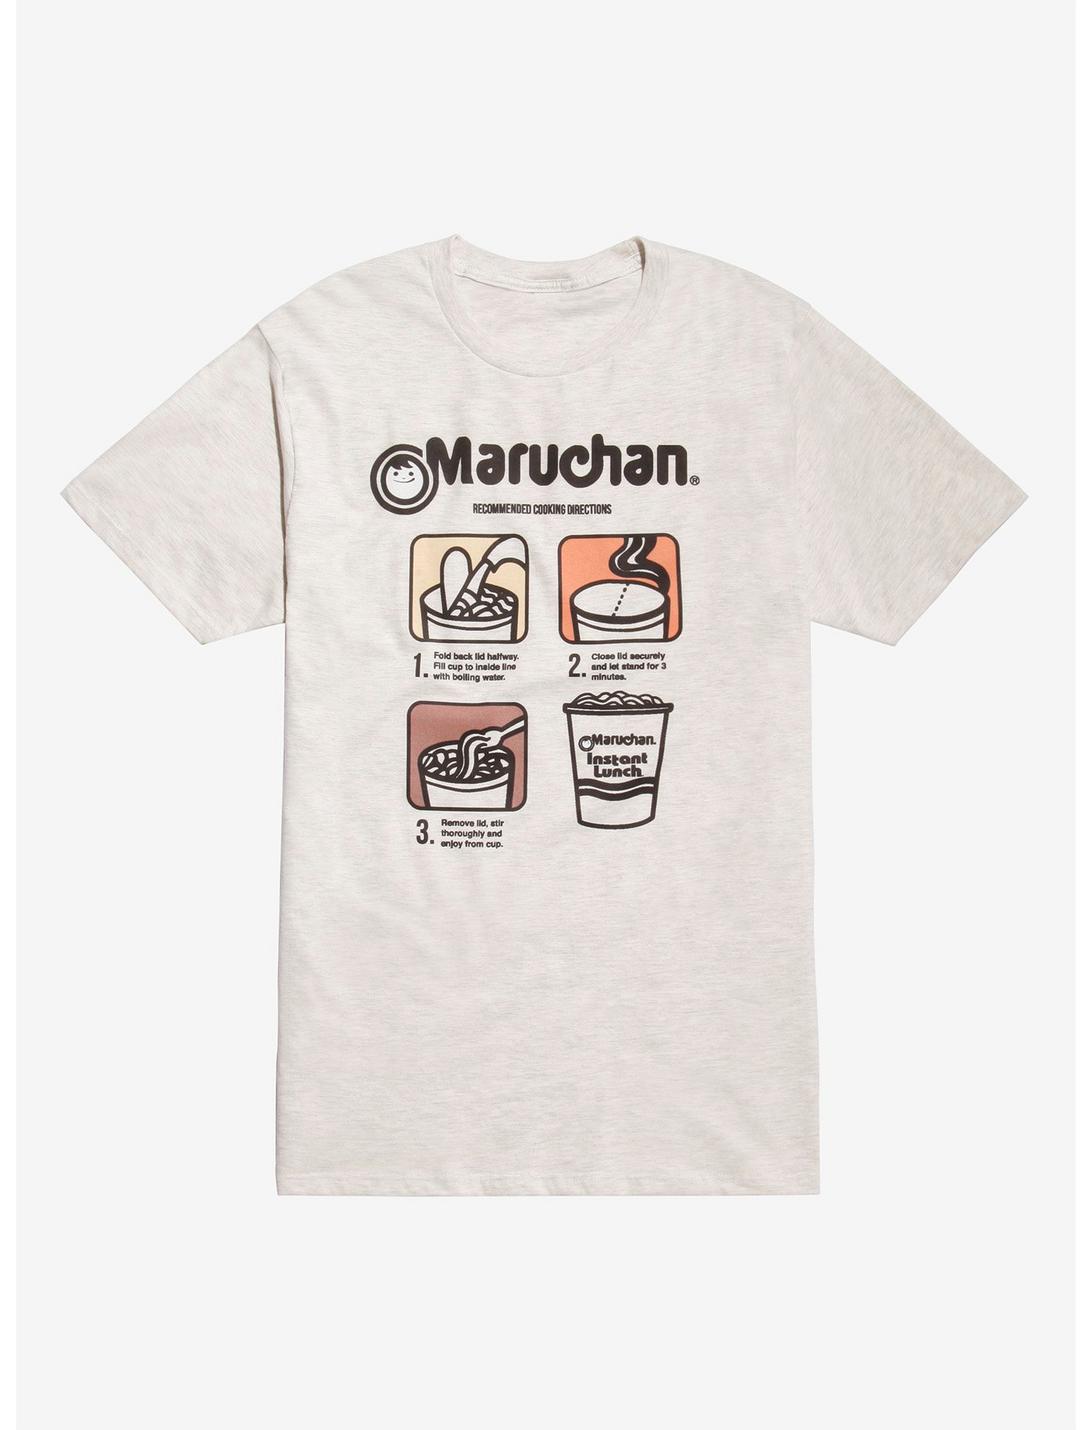 Maruchan Instant Lunch Instructions T-Shirt, MULTI, hi-res